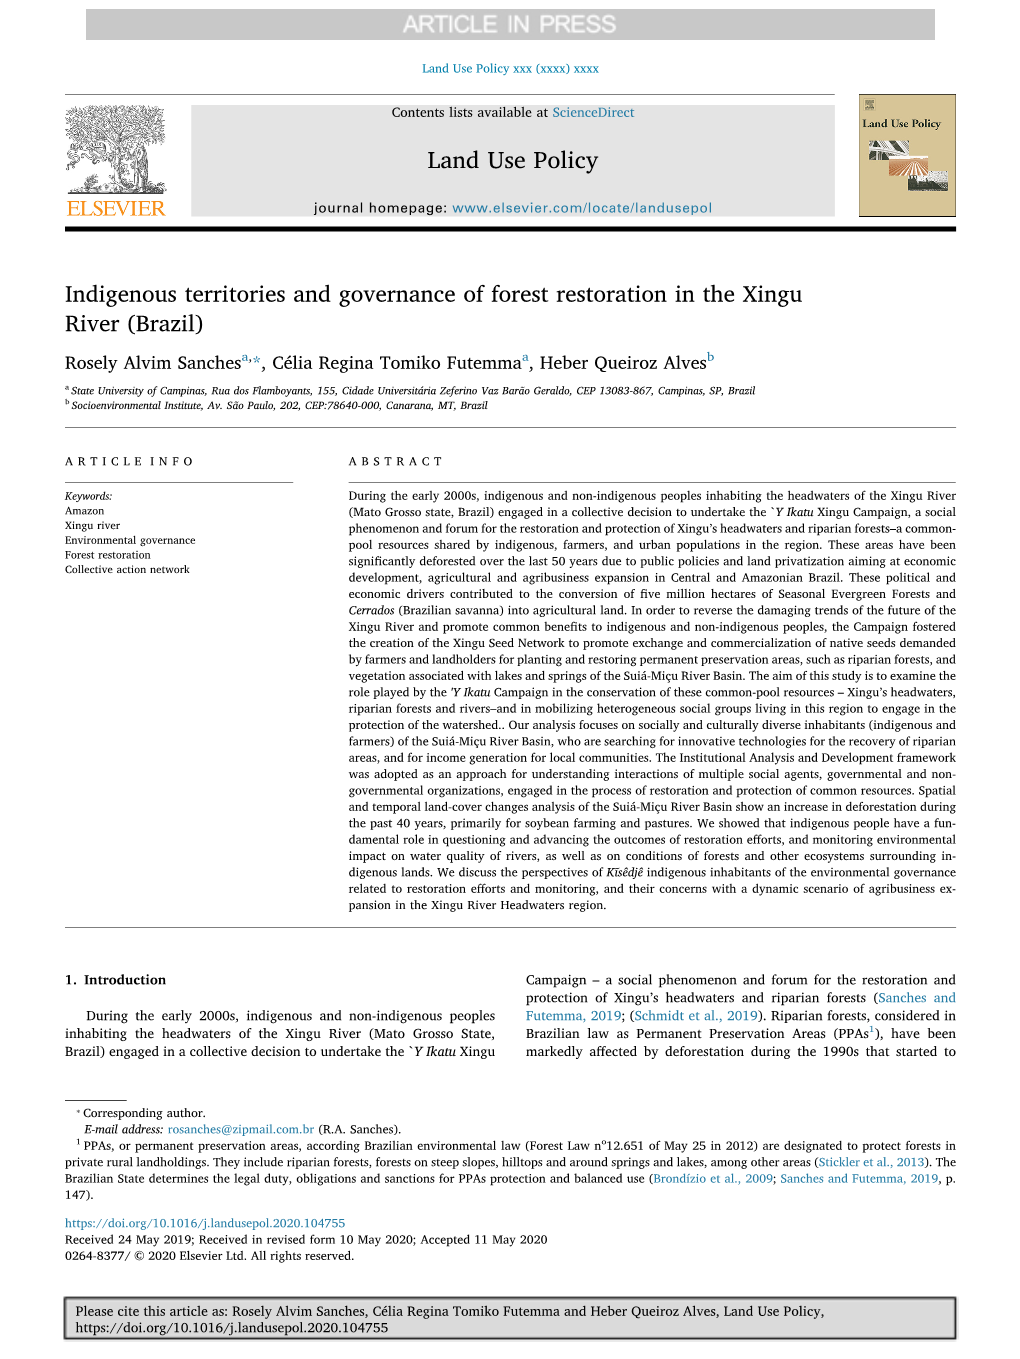 Indigenous Territories and Governance of Forest Restoration in the Xingu River (Brazil)